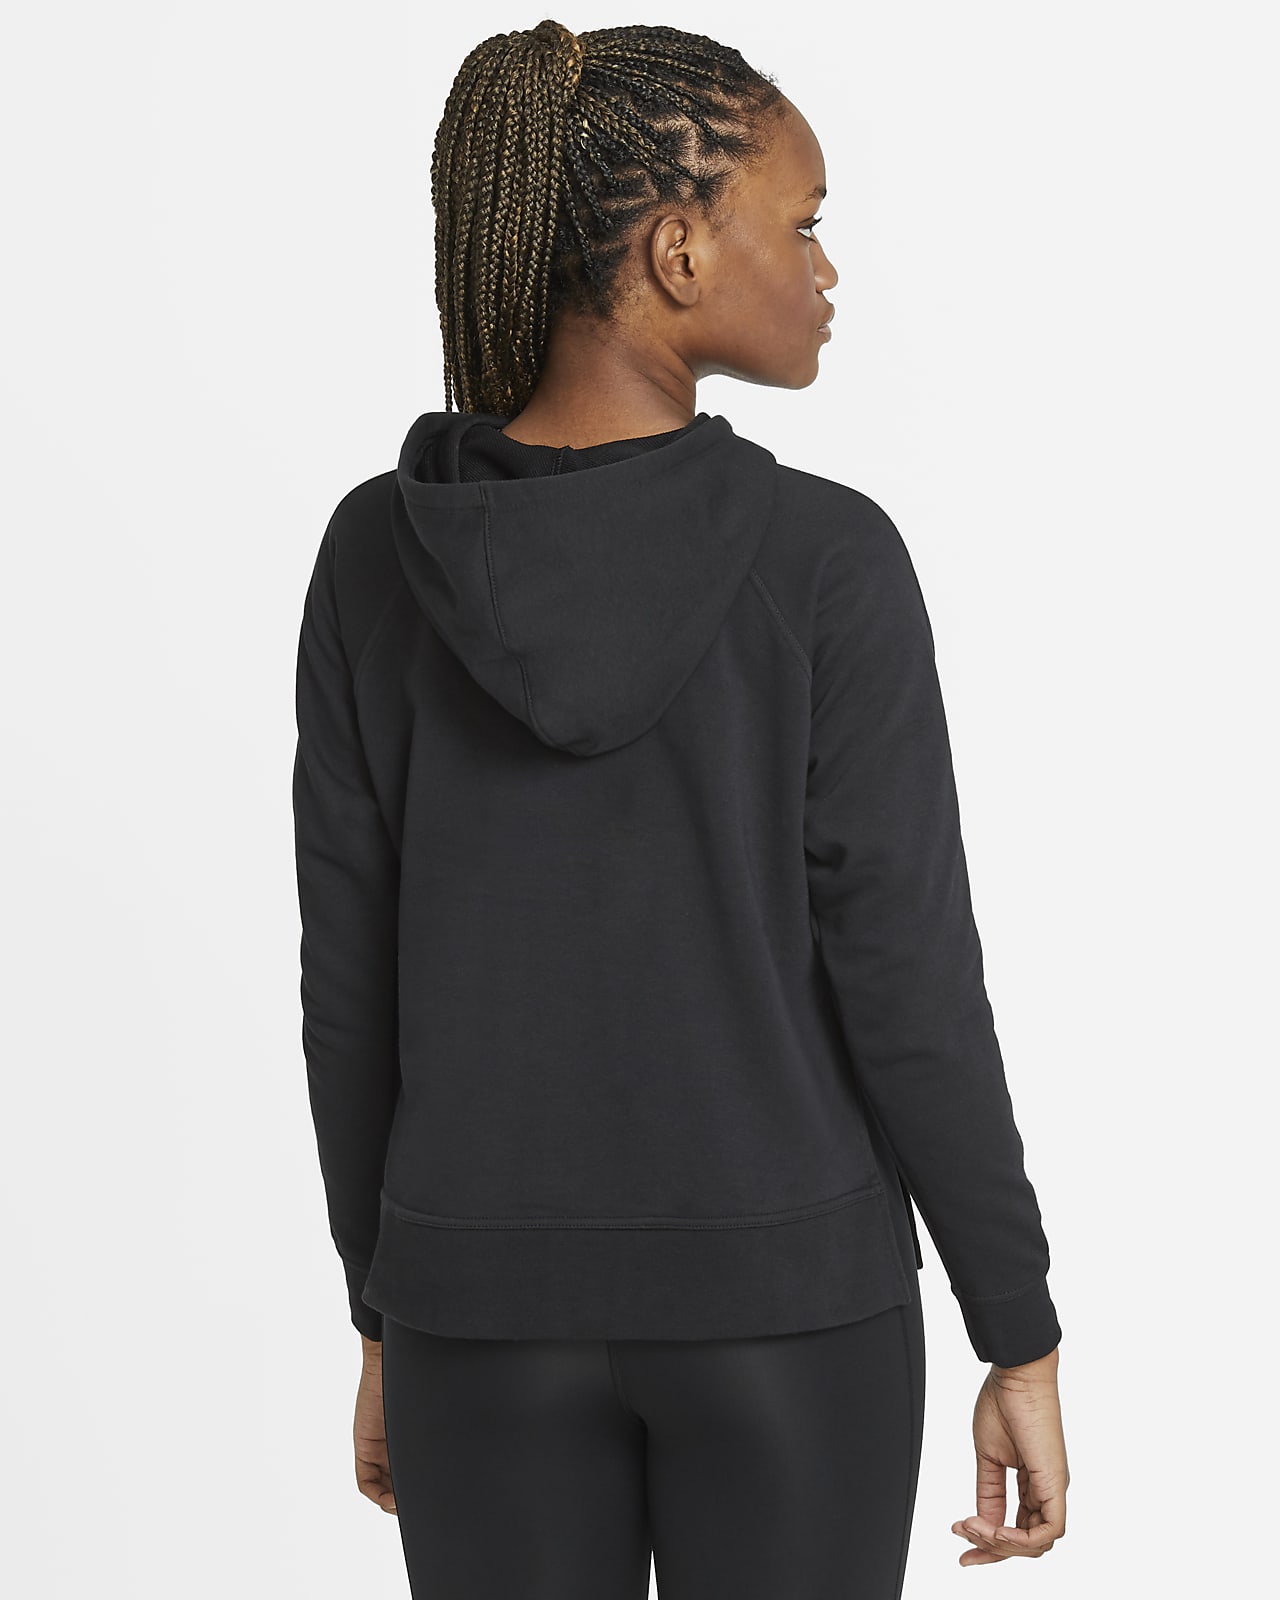 Nike Dri-FIT Get Fit Women's Pullover Graphic Training Hoodie. Nike SA